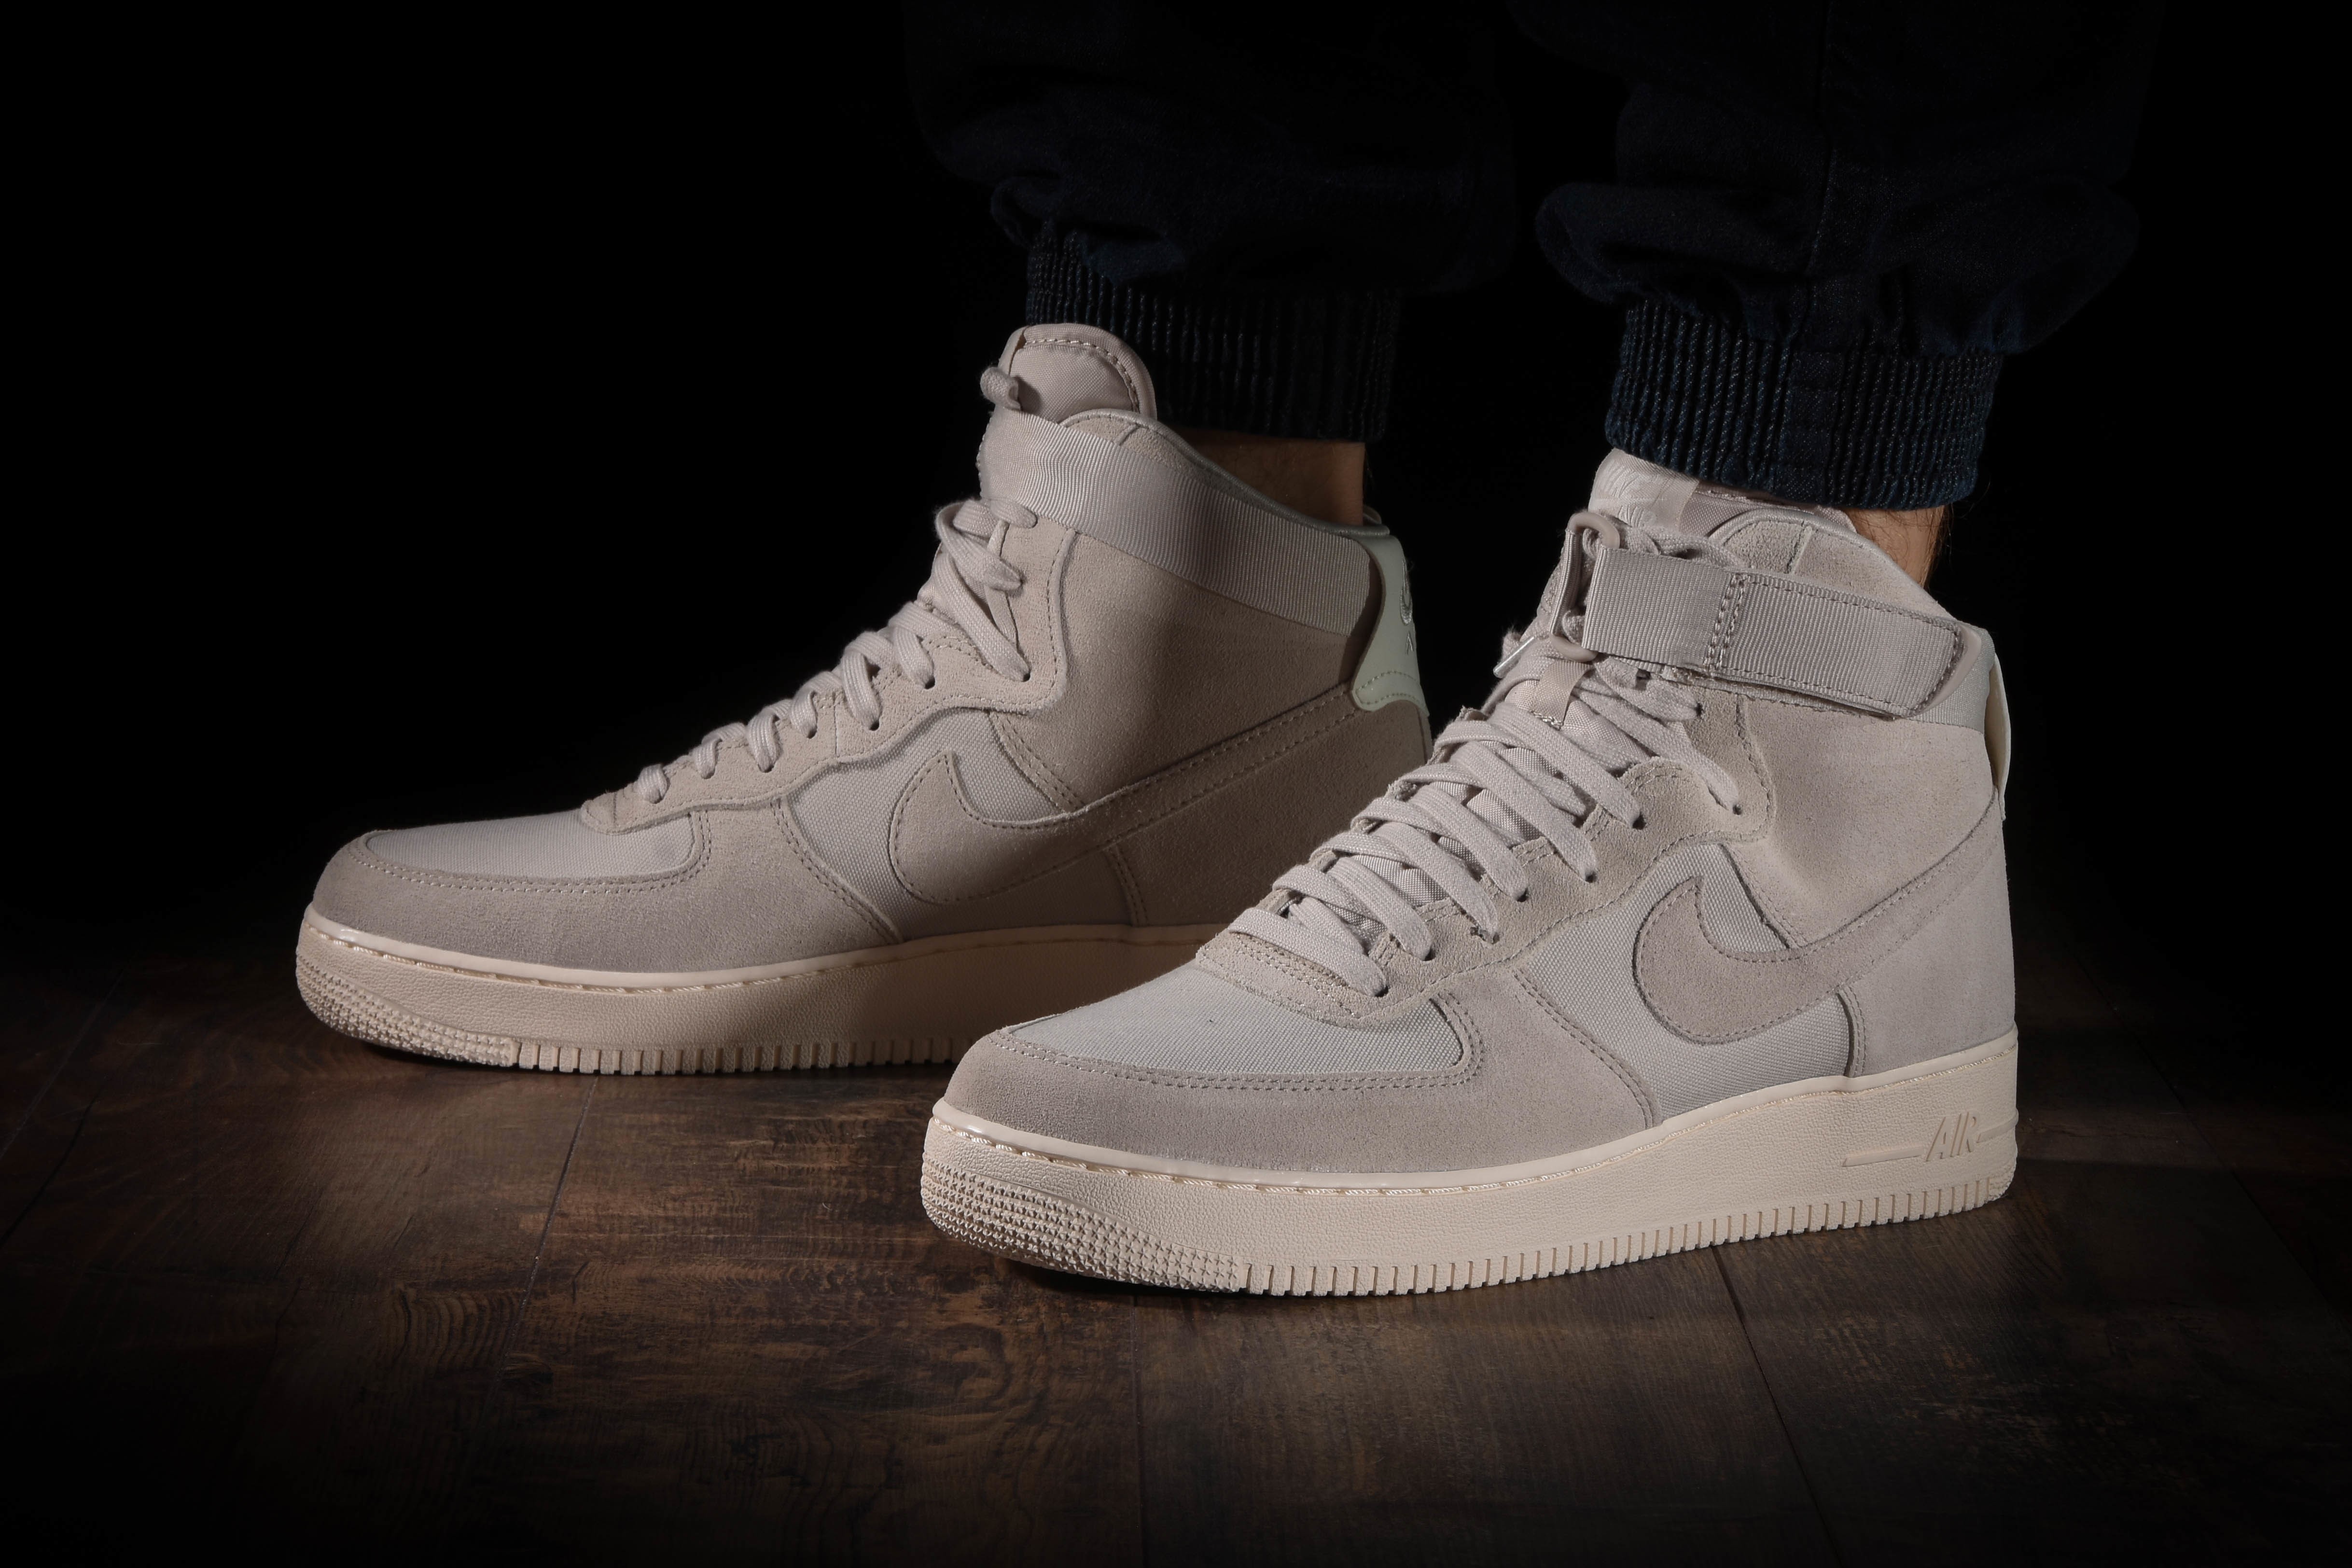 NIKE AIR FORCE 1 HIGH '07 SUEDE for £85 